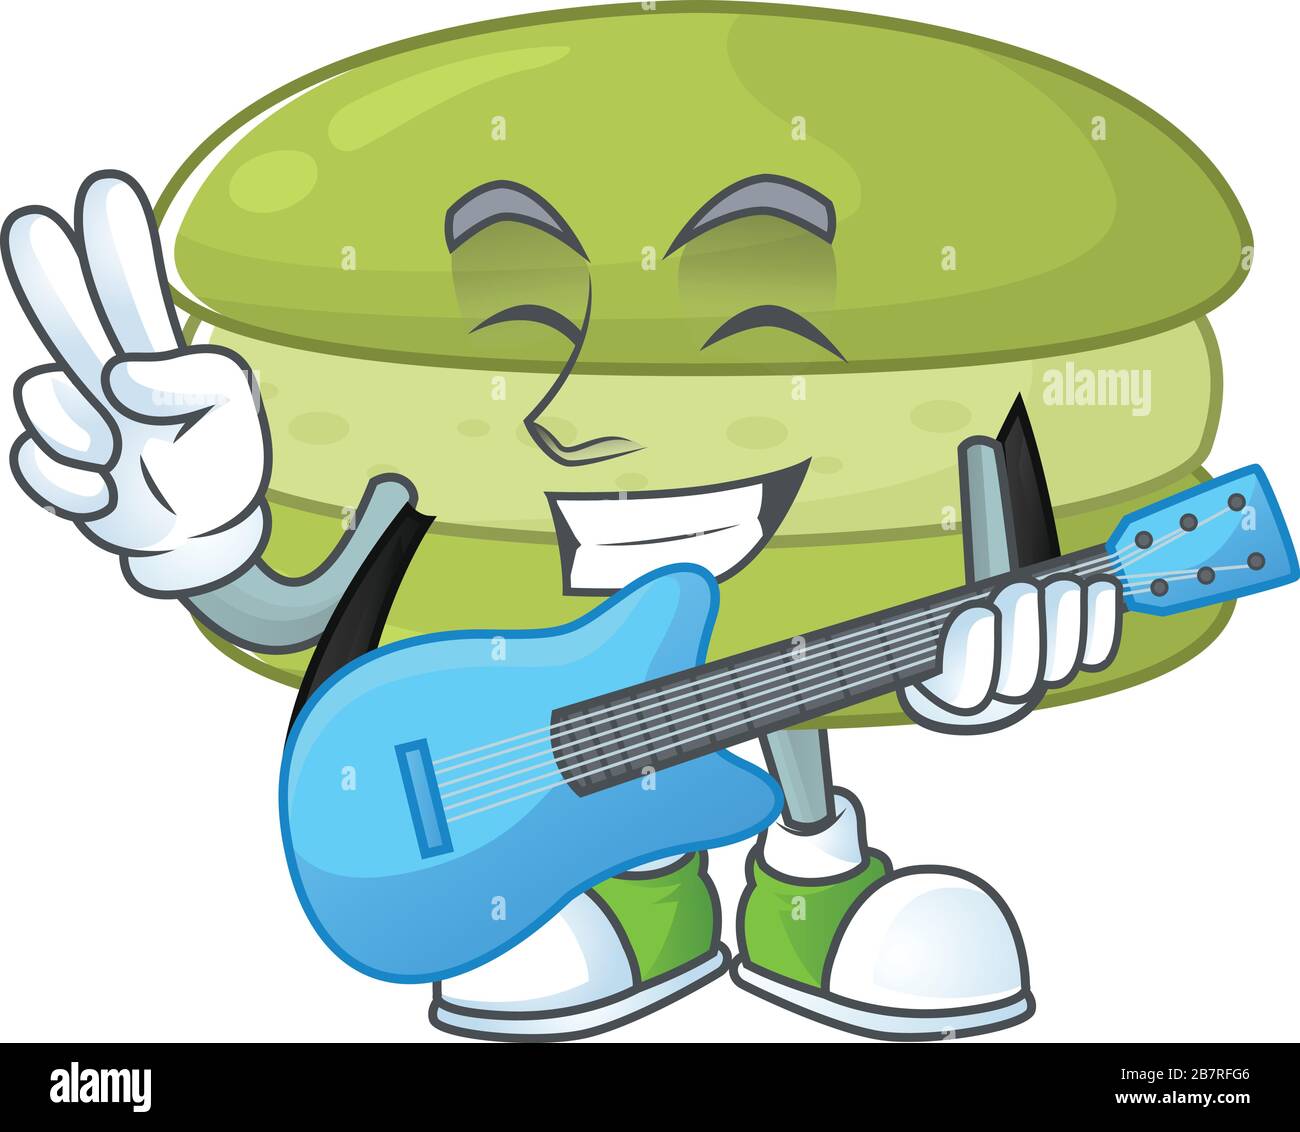 Supper talented coconut macarons cartoon design with a guitar Stock Vector